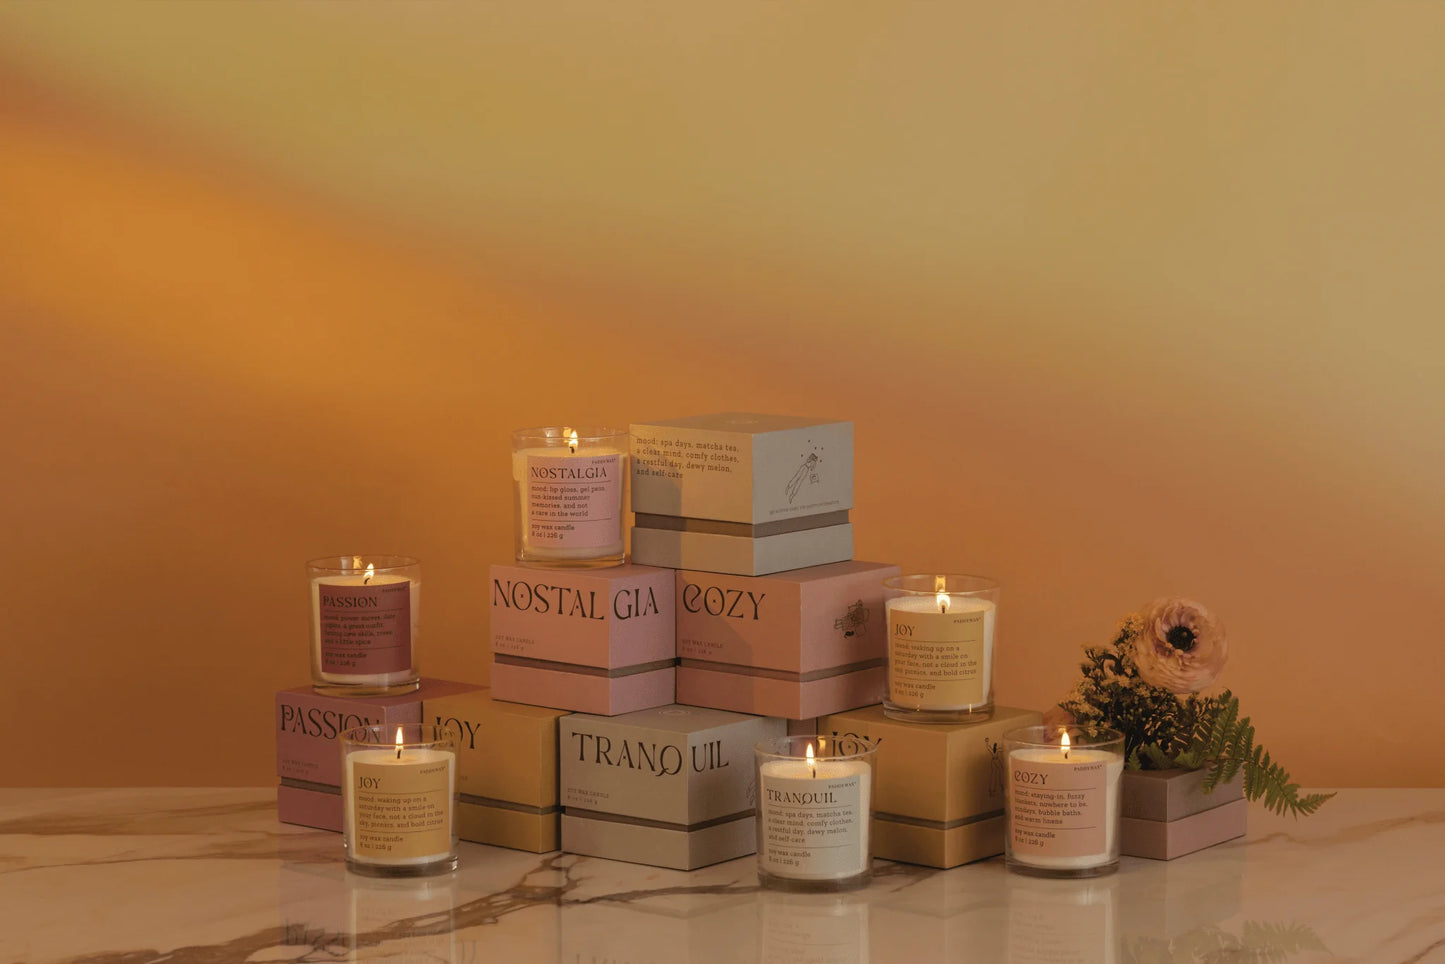 Mood Collection Tranquil Candle